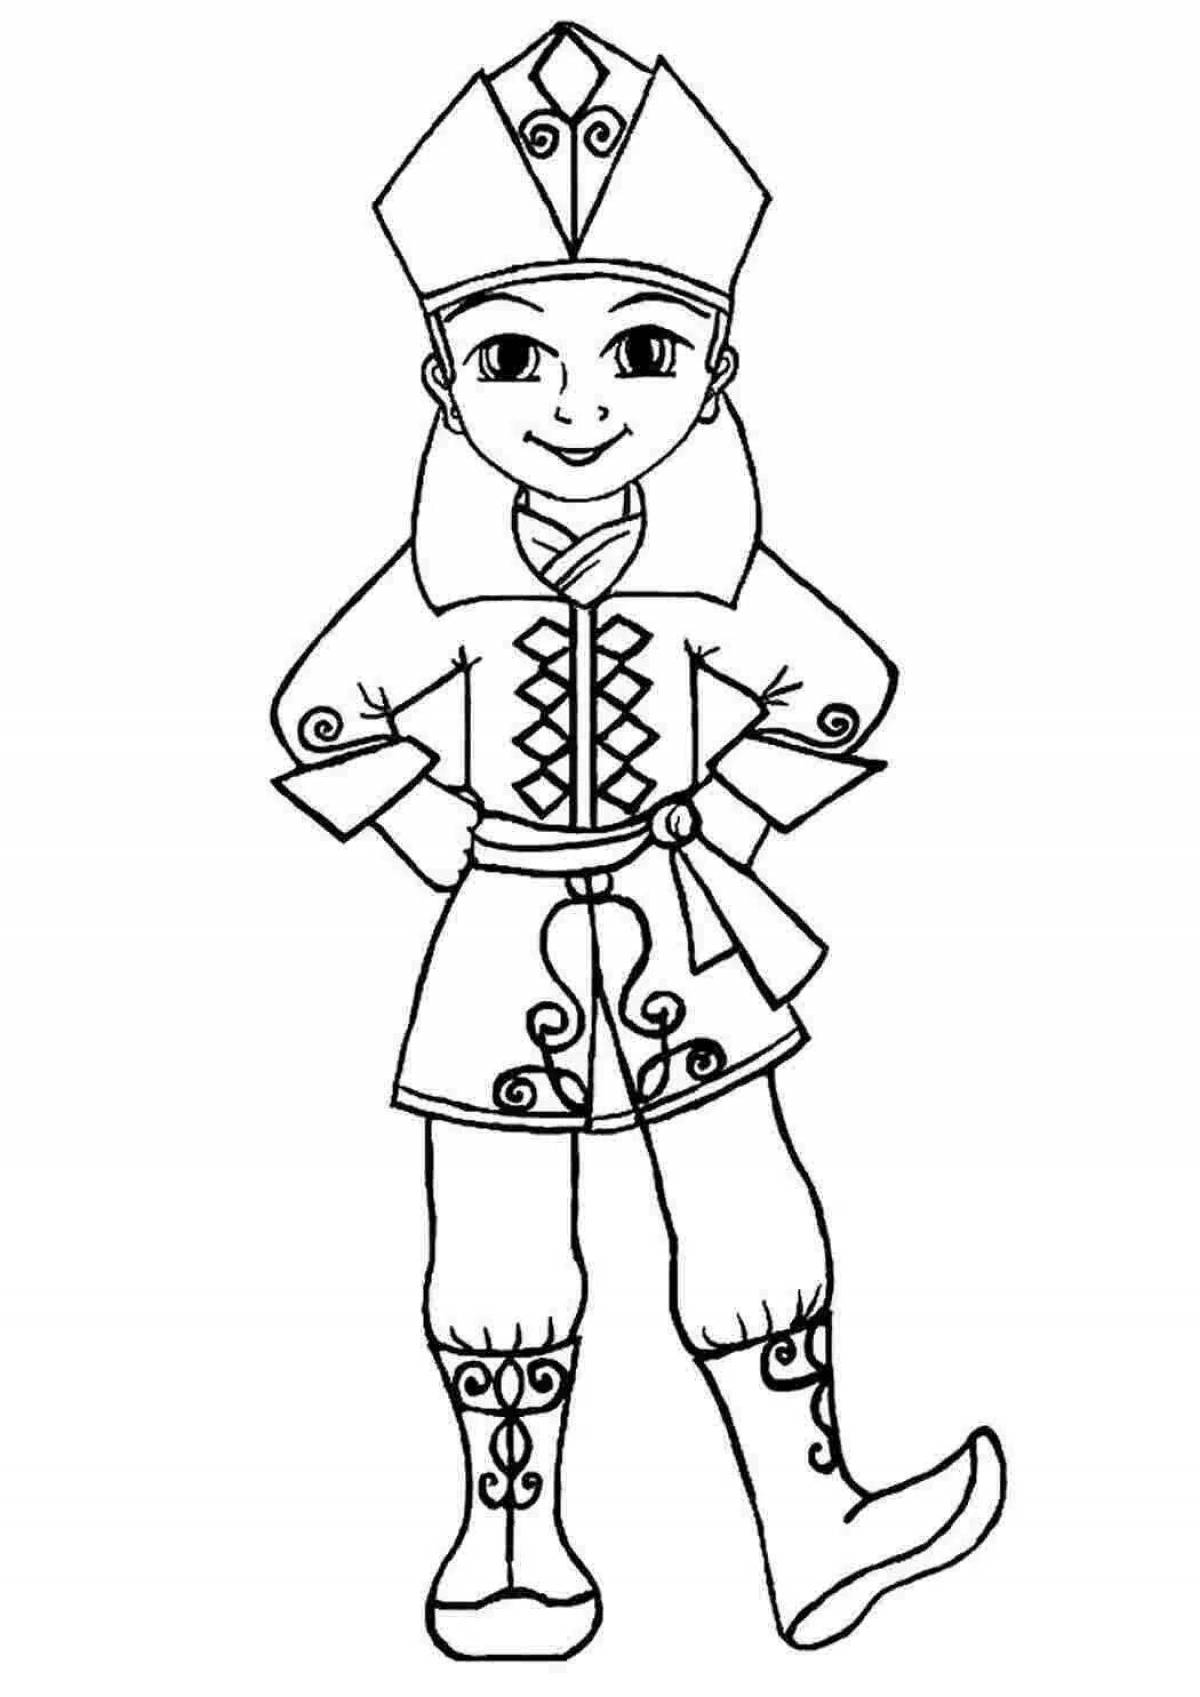 Coloring pages in folk costumes for children